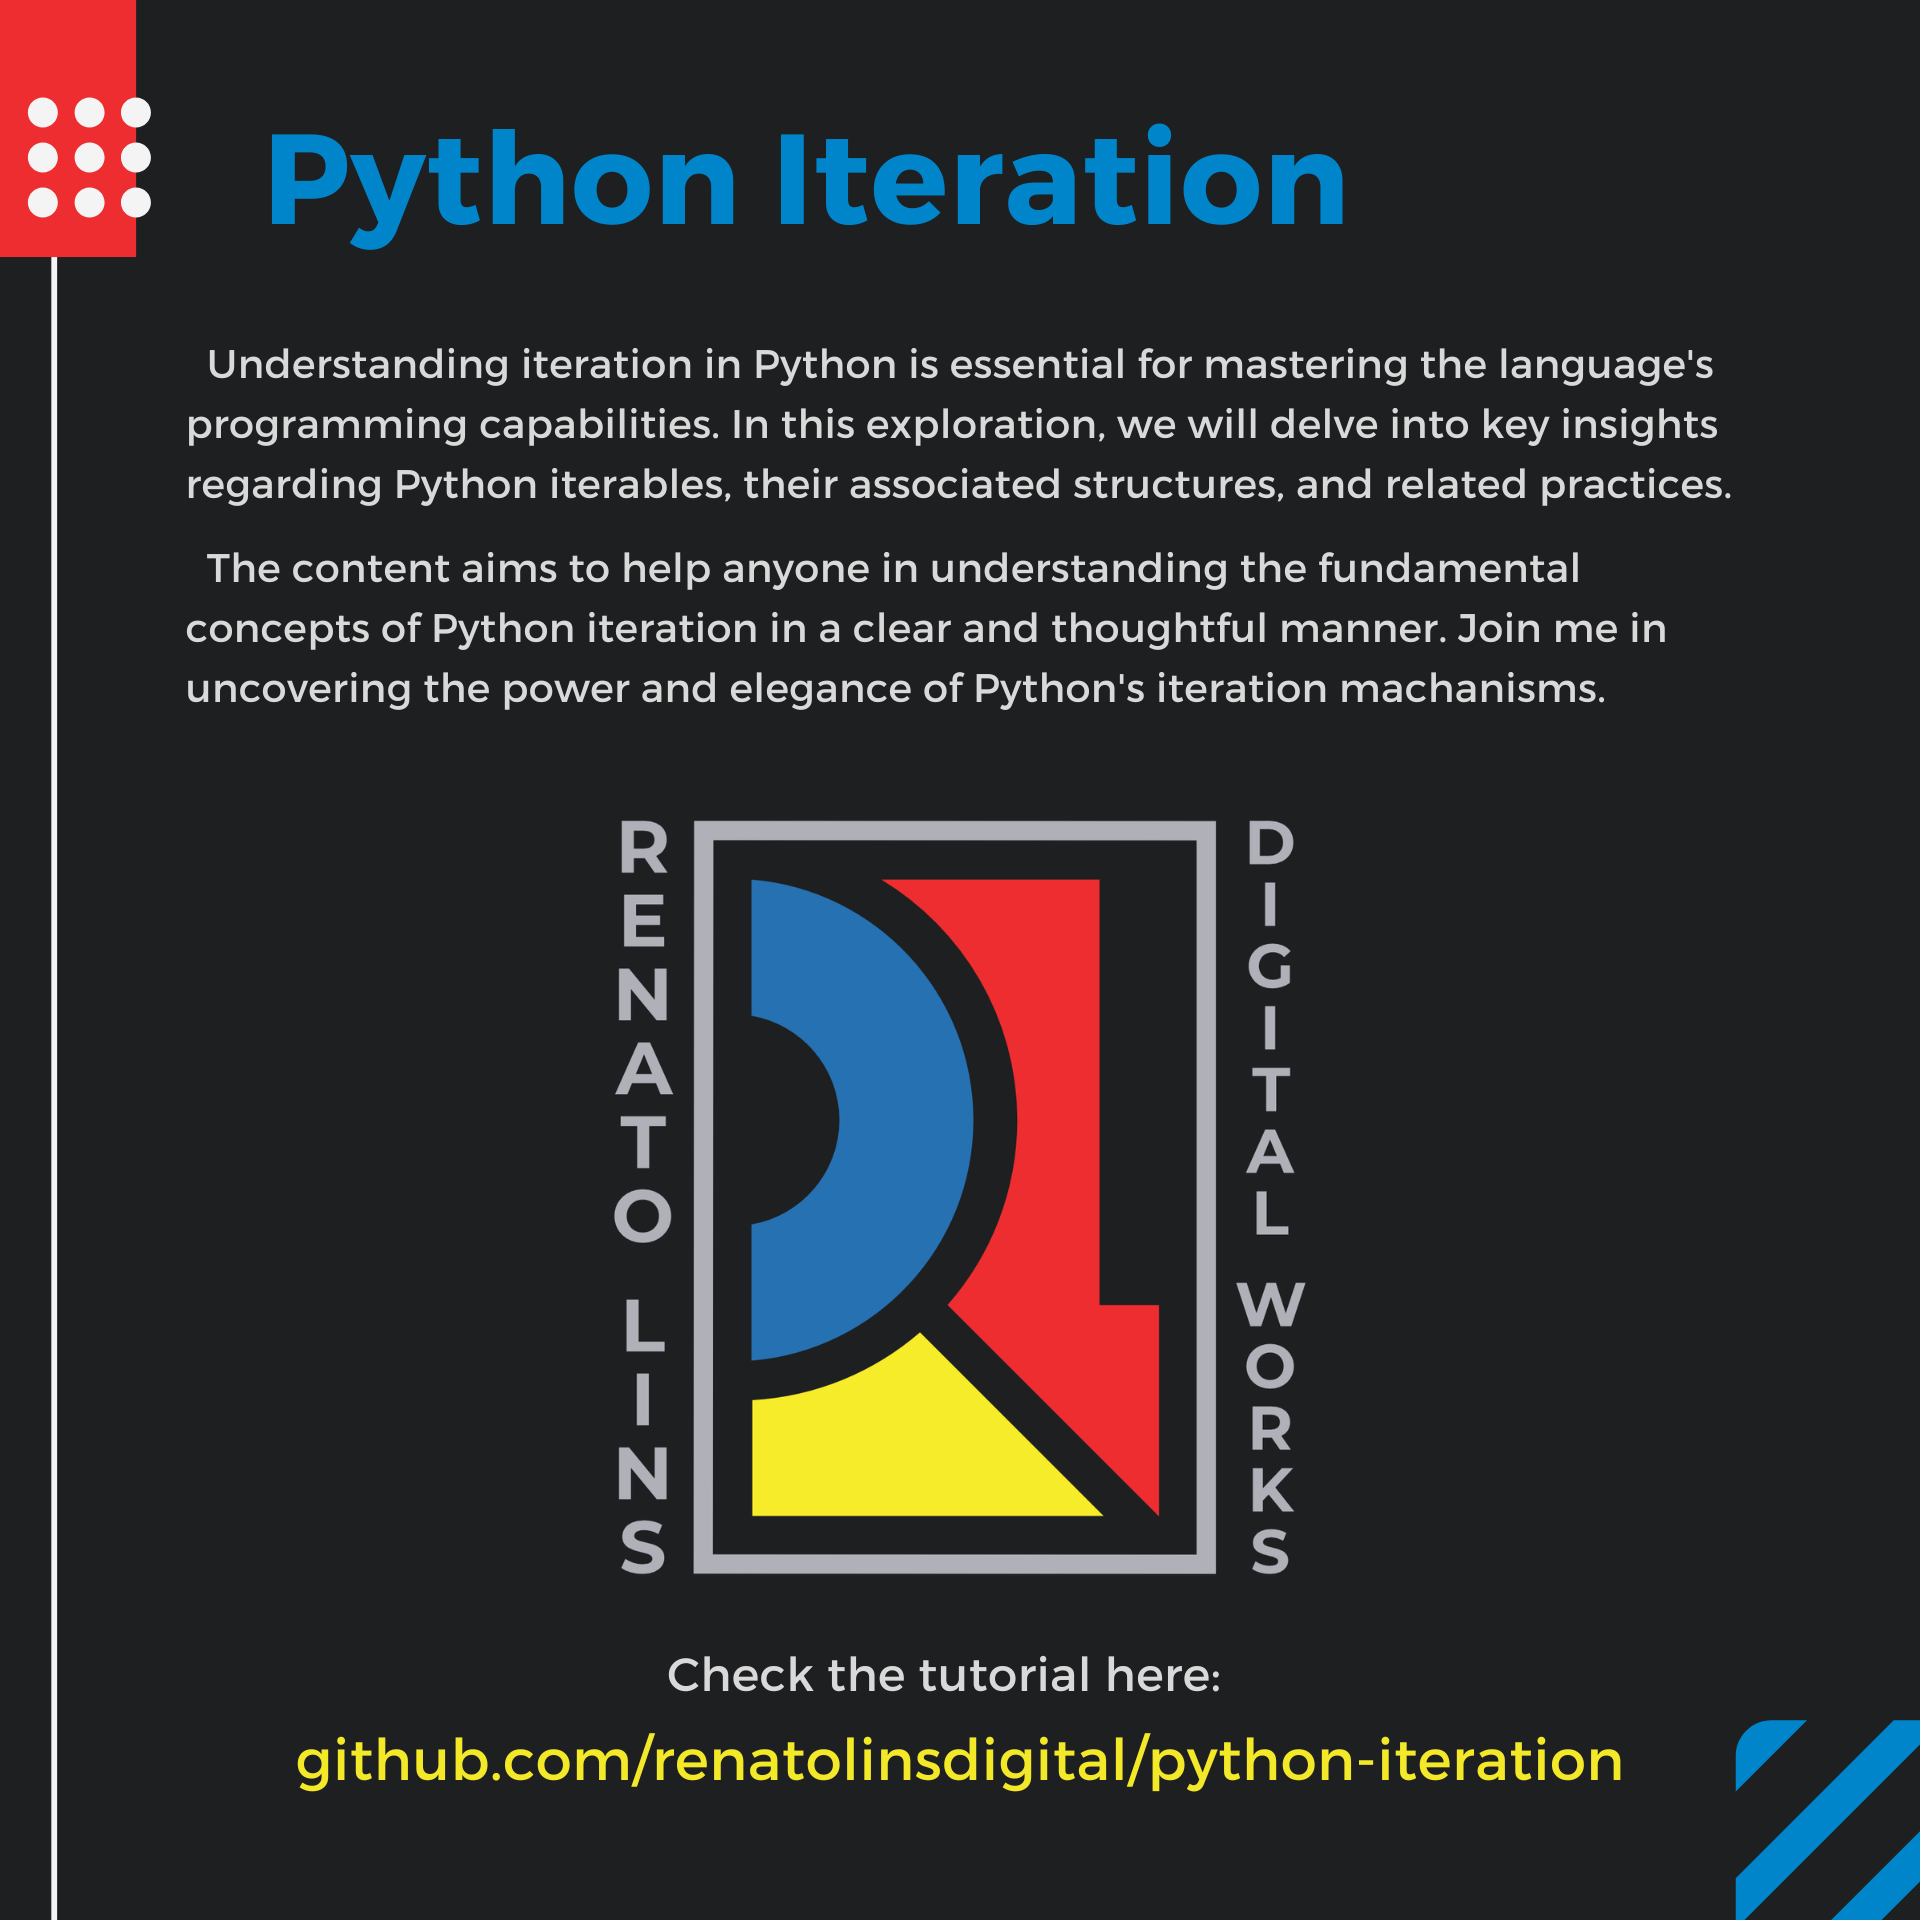 Understanding iteration in Python is essential for mastering the language's
programming capabilities. In this exploration, we will delve into key insights
regarding Python iterables, their associated structures, and related practices.

The content aims to help anyone in understanding the fundamental
concepts of Python iteration in a clear and thoughtful manner. Join me in
uncovering the power and elegance of Python's iteration machanisms.

nZ—-r O-H»Zmxo

TPF Tob Mab Edel

Check the tutorial here:
github.com/renatolinsdigital/python-iteration